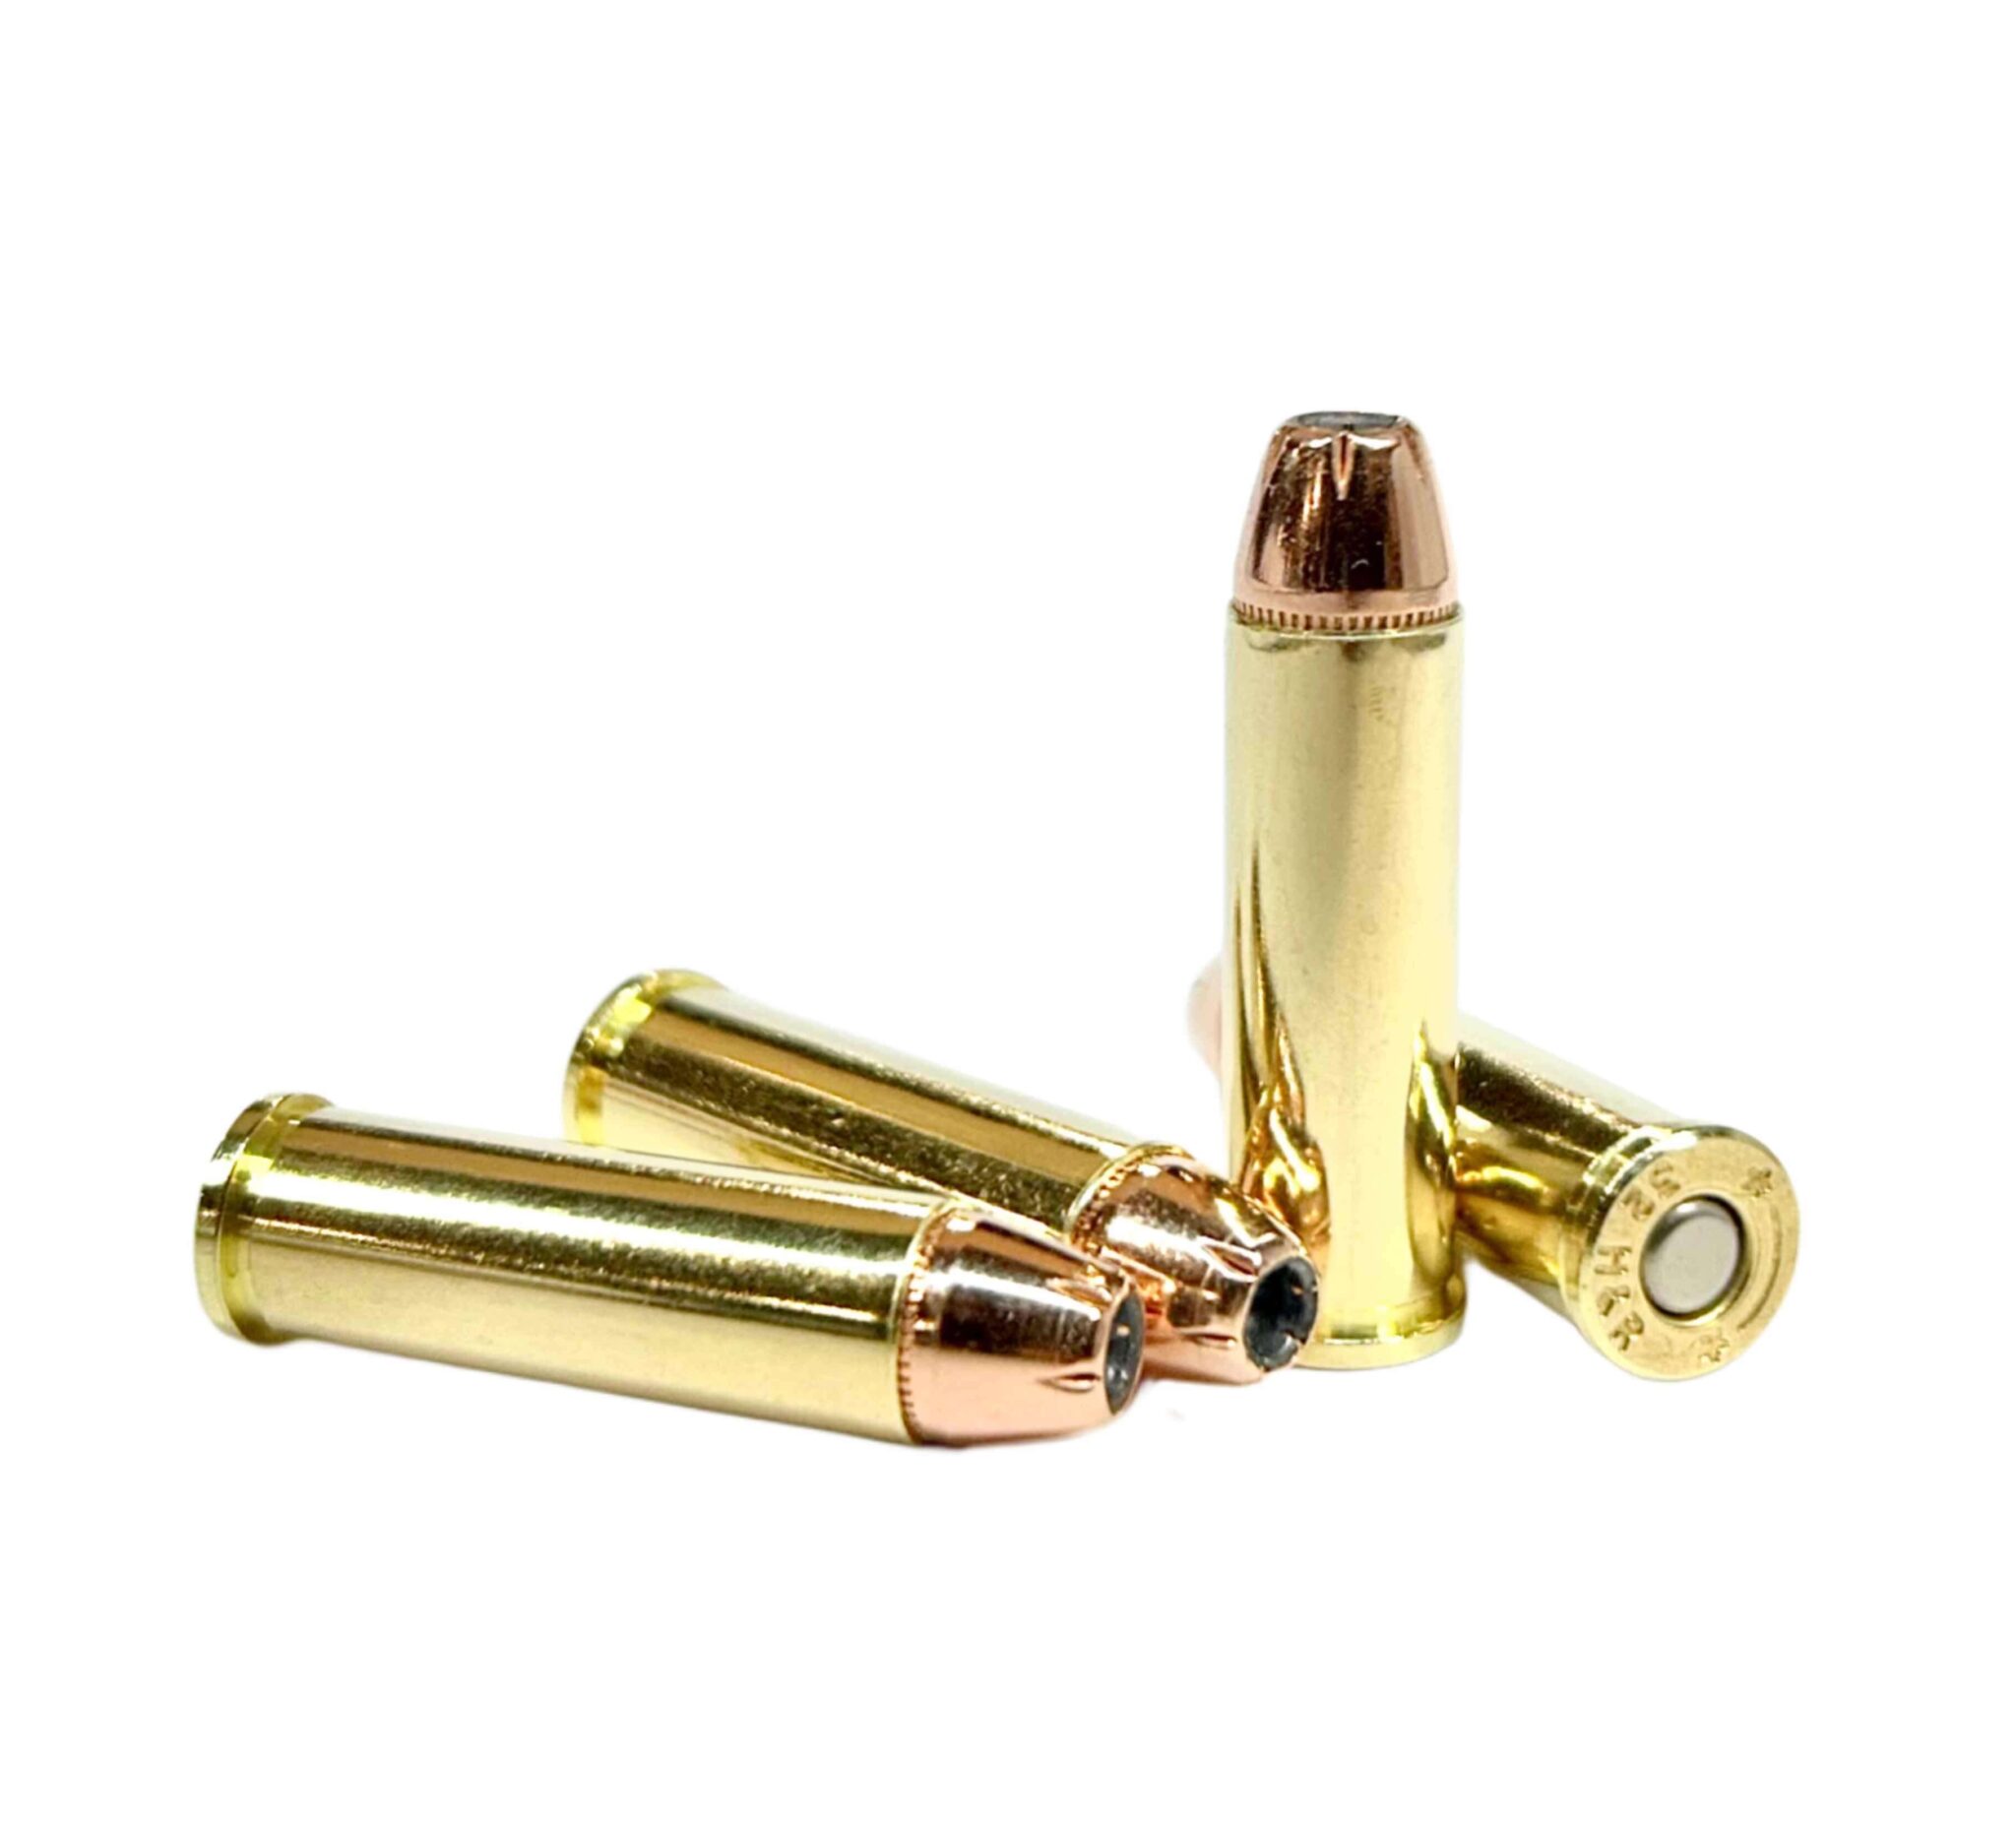 32 H&R Magnum 85gr Jacketed Hollow Point